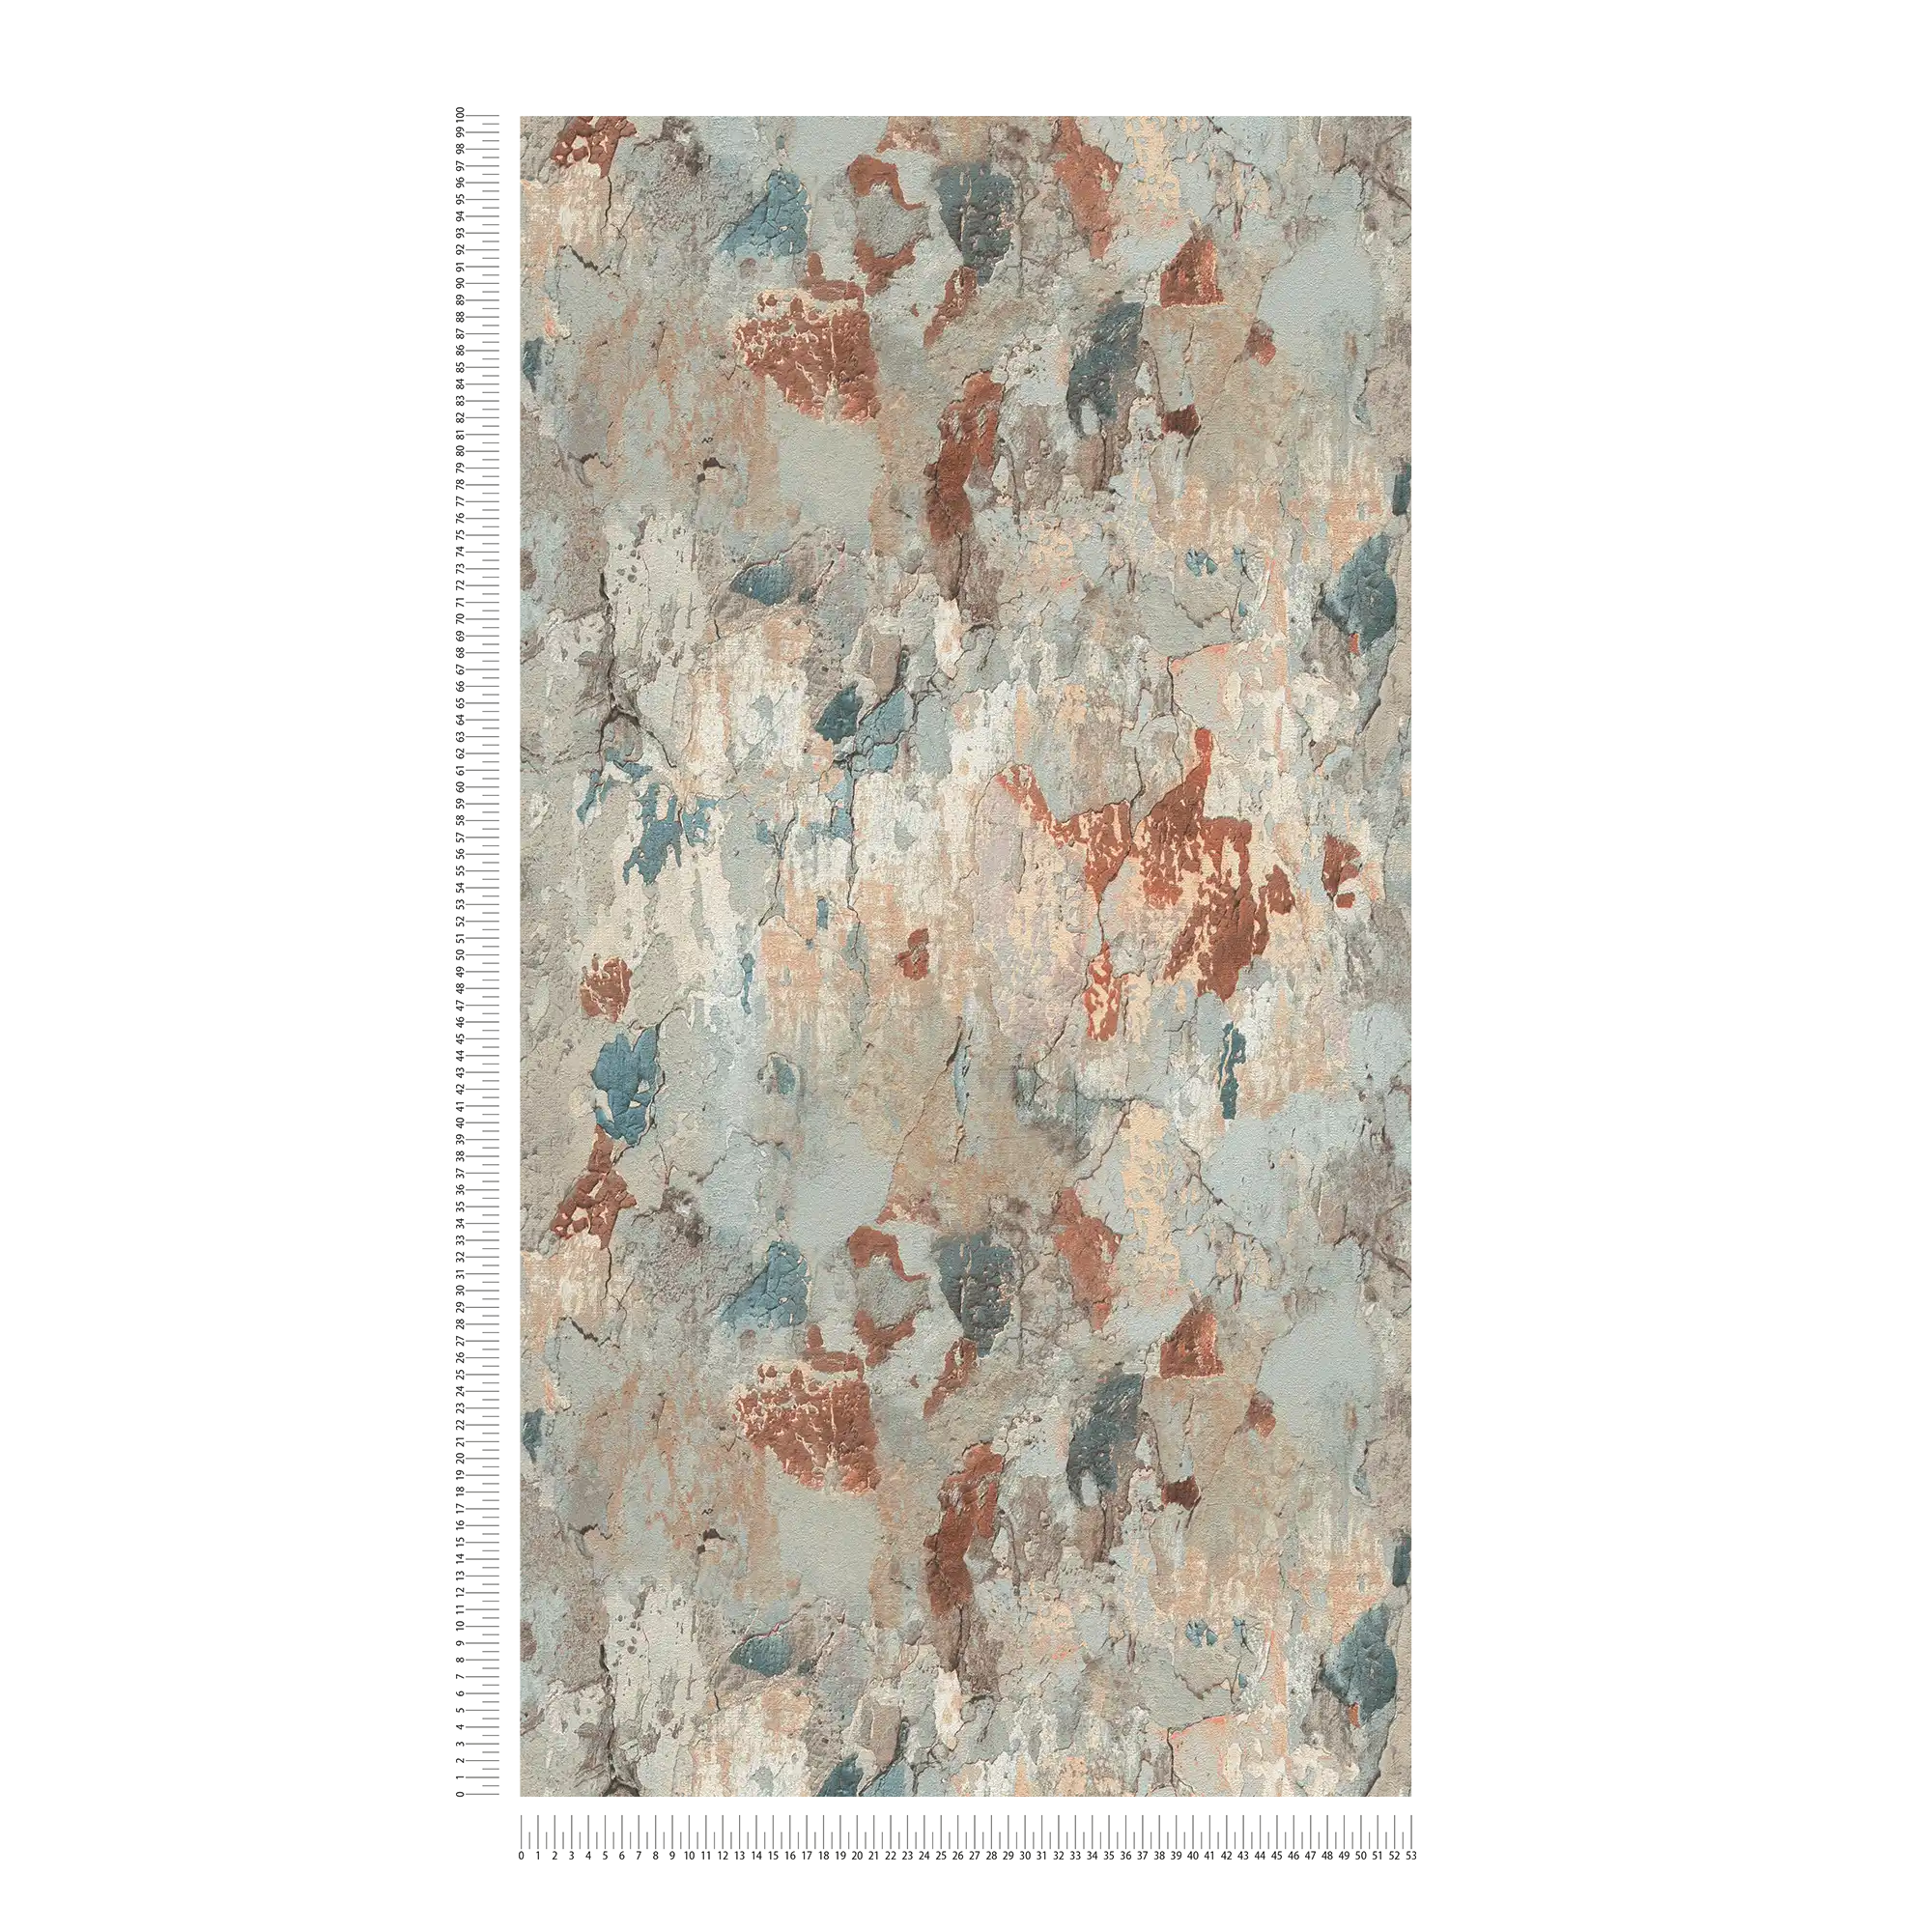             Rustic non-woven wallpaper with plaster look in used look - brown, grey, green
        